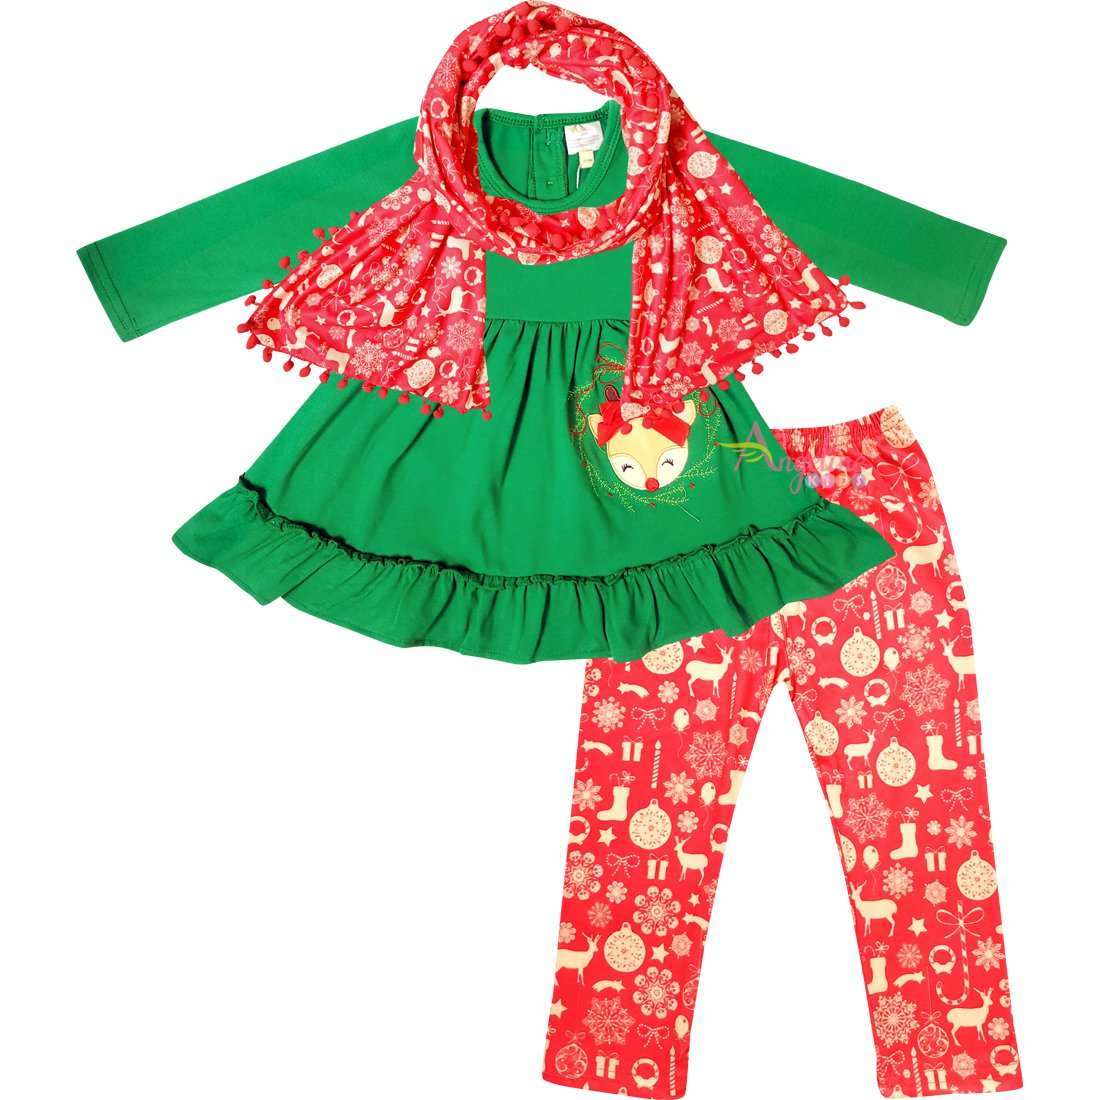 Angeline Kids:Toddler Little Girls Merry Christmas Reindeer Scarf Outfit